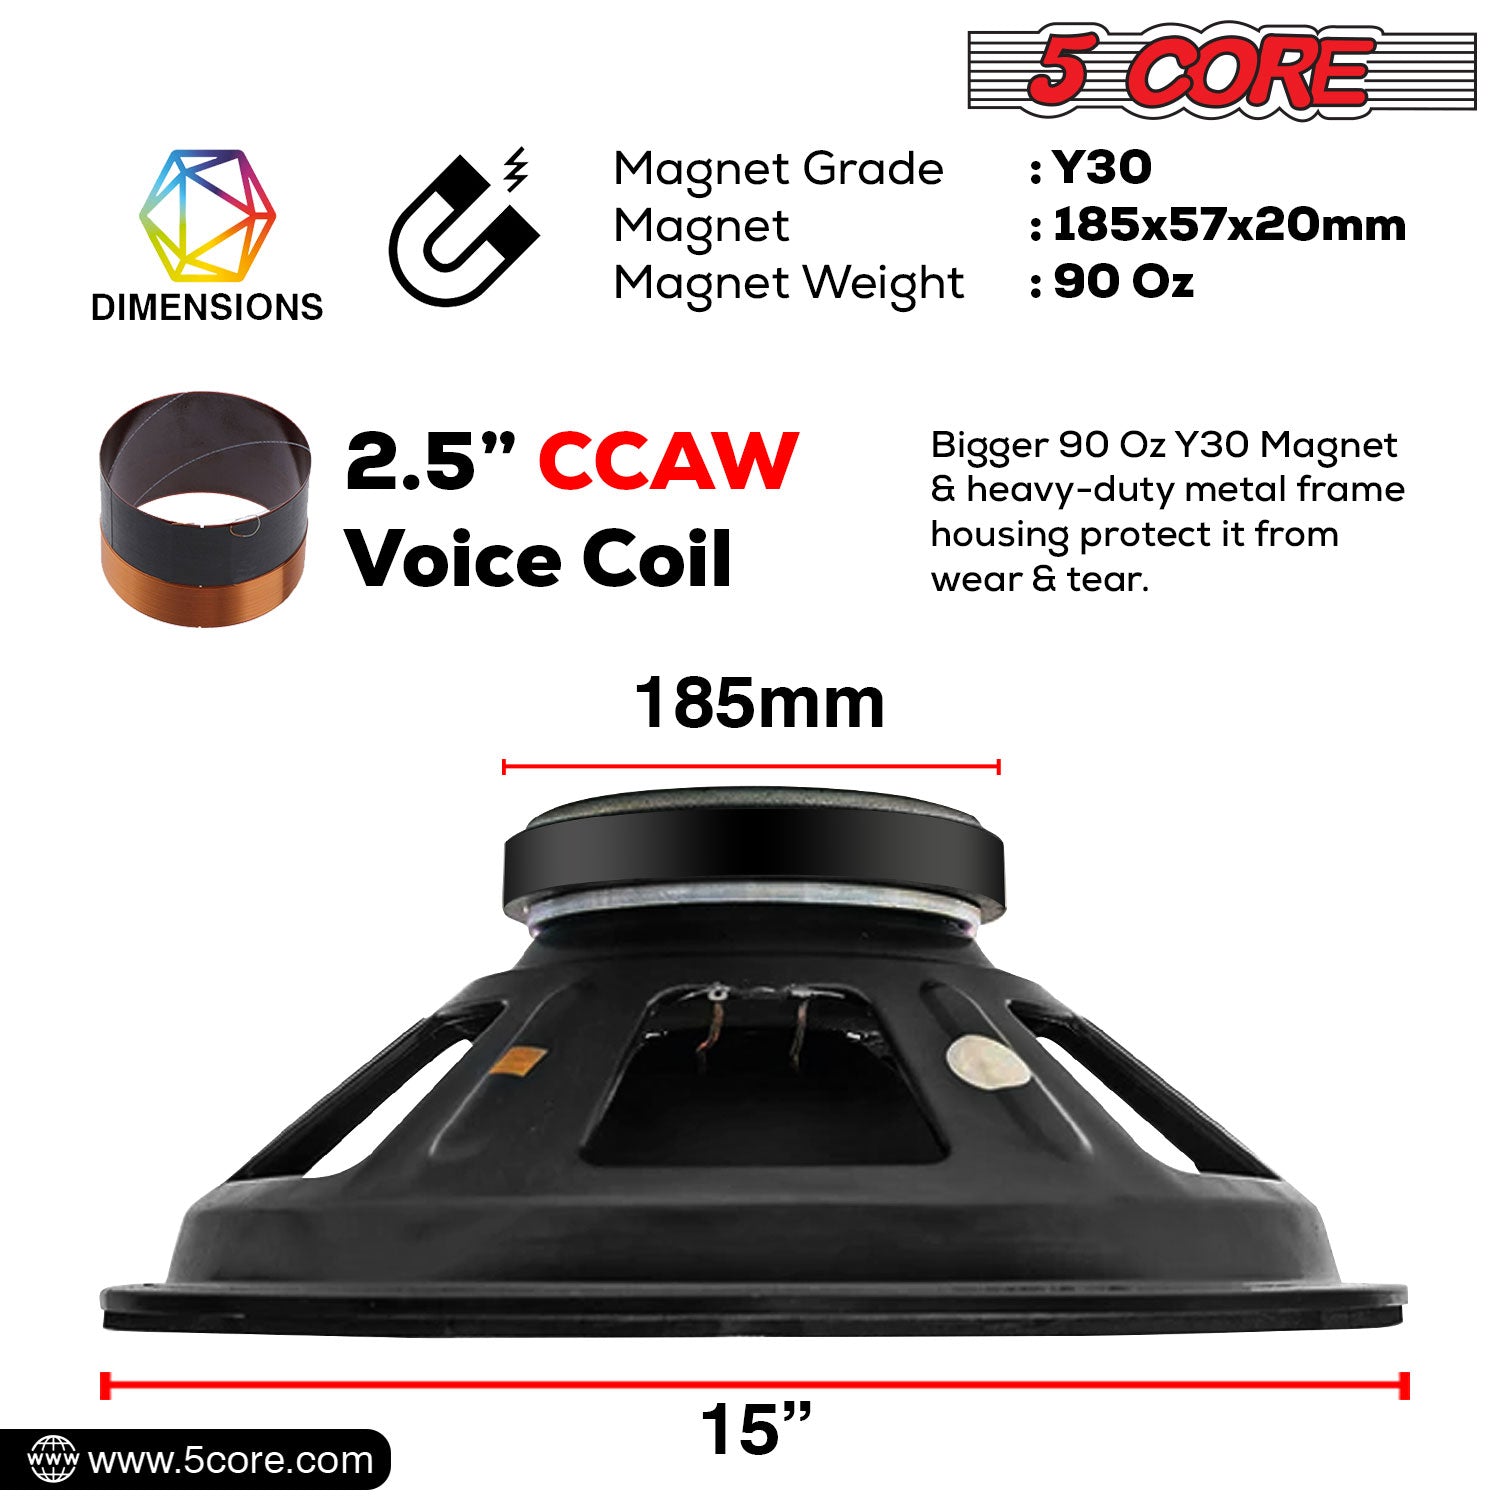 Replacement speaker with 2.5" CCAW voice coil